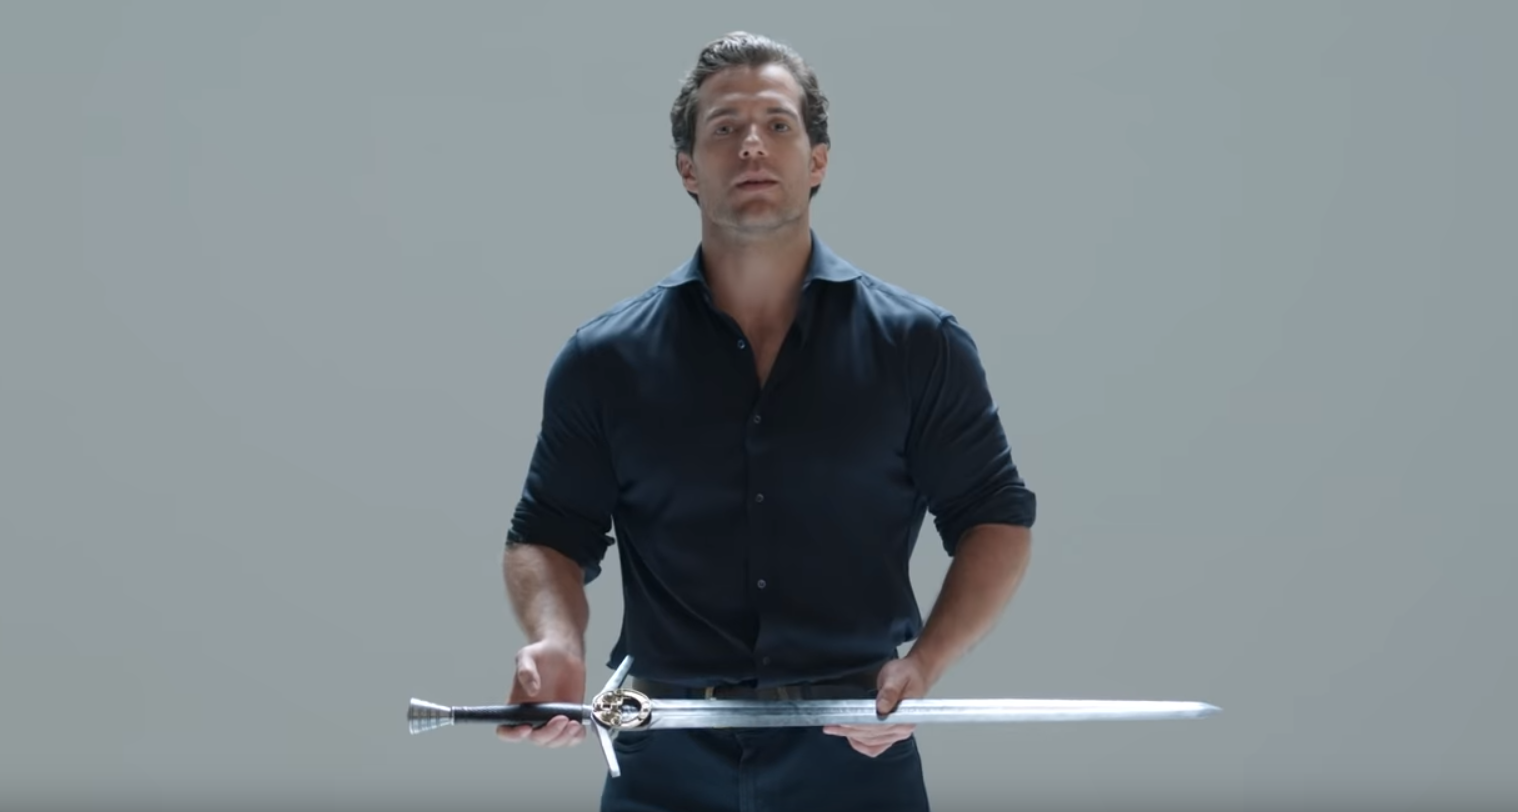 Image for Henry Cavill seduces you softly while talking about Witcher’s swords - ASMR